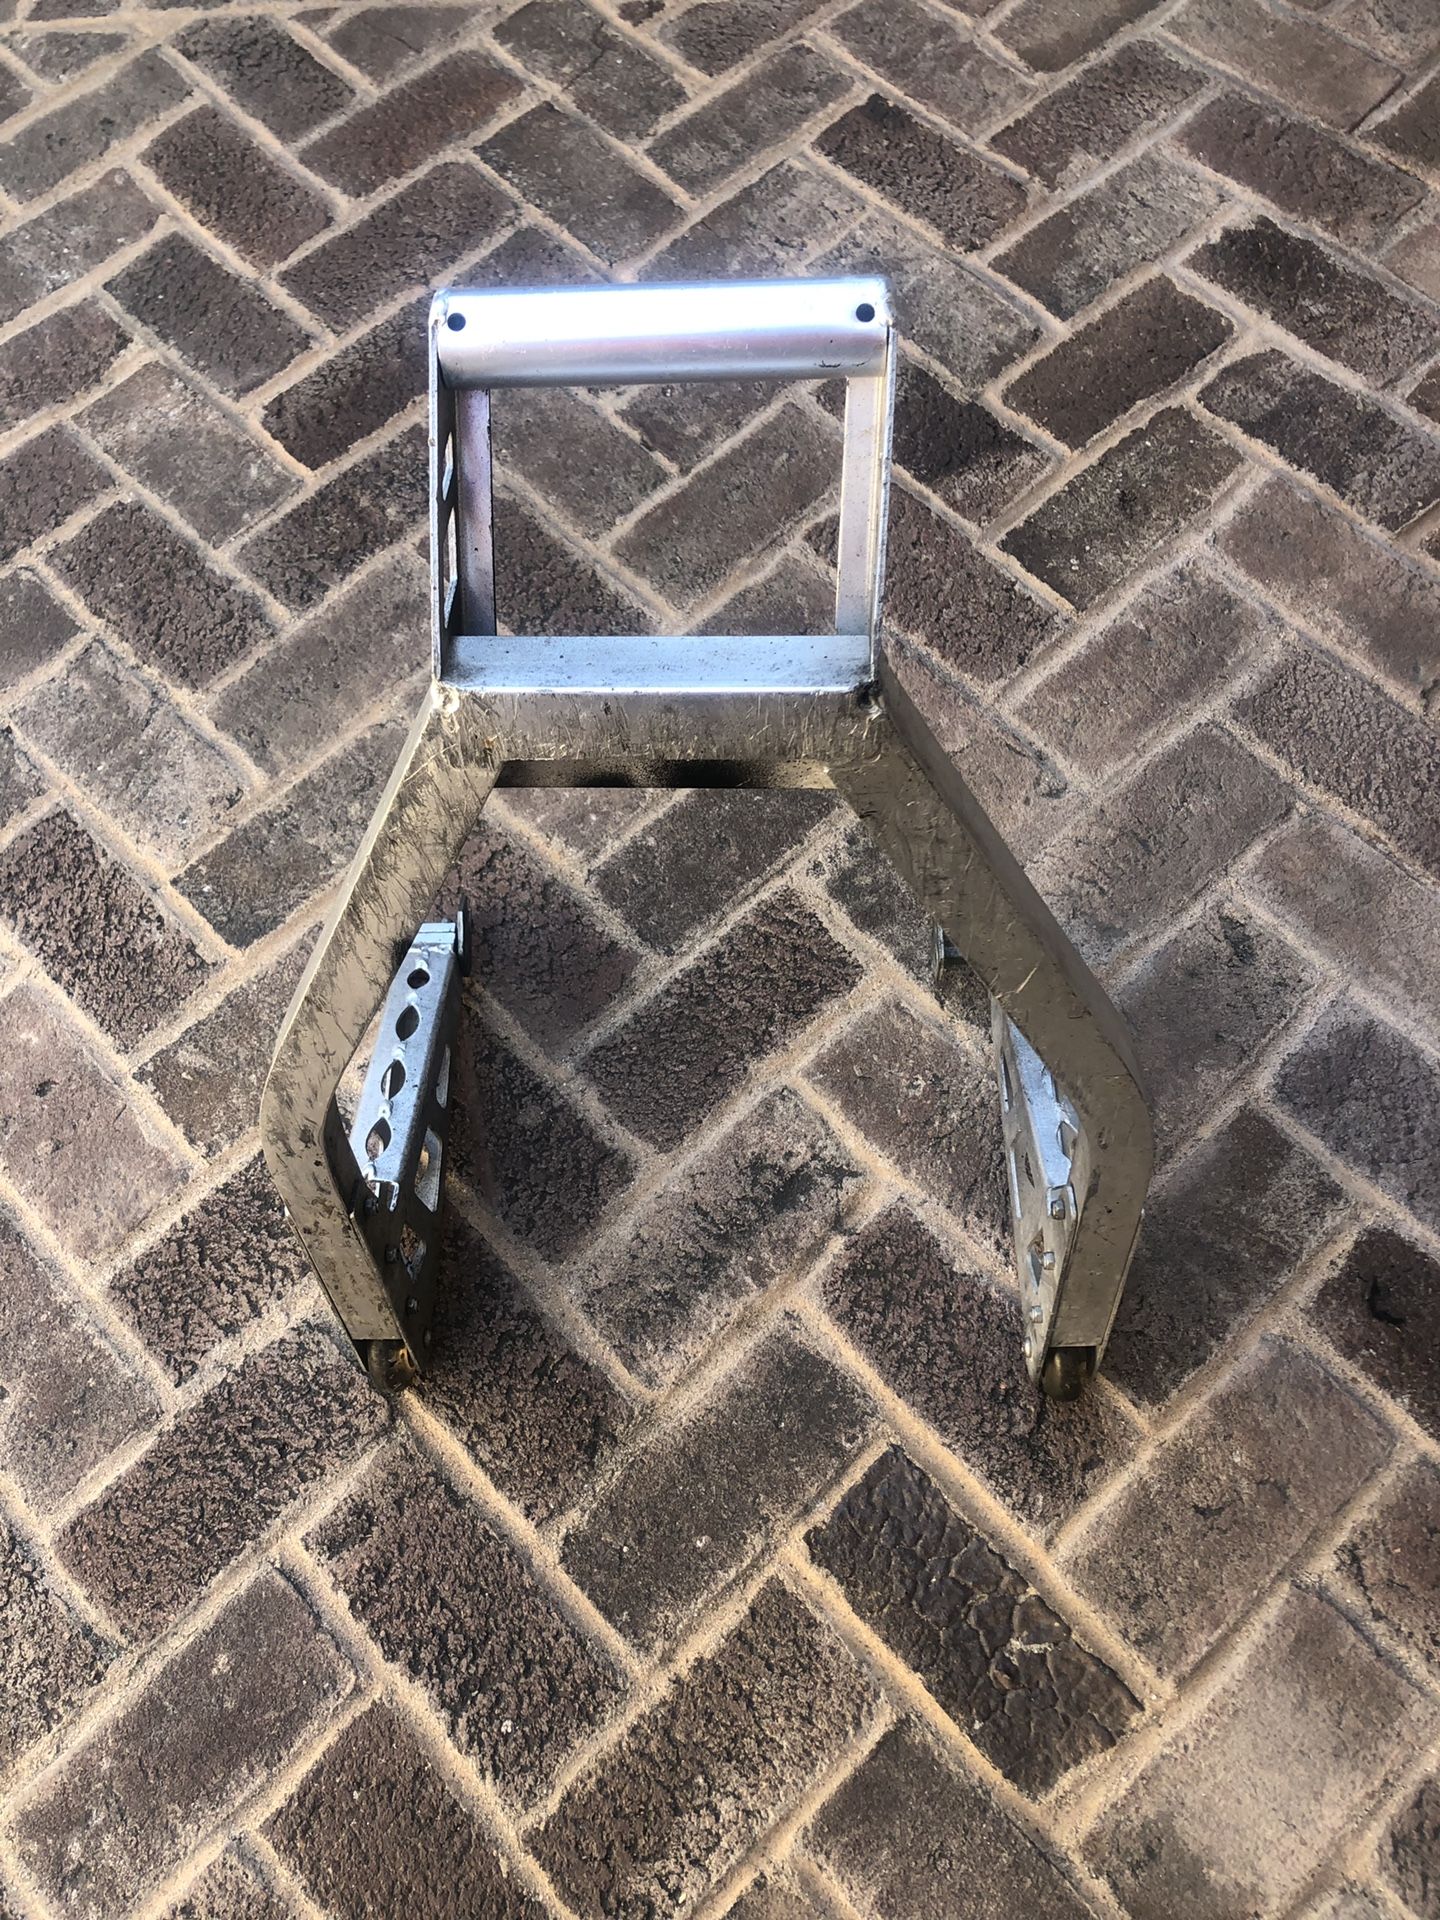 Motorcycle rear stand